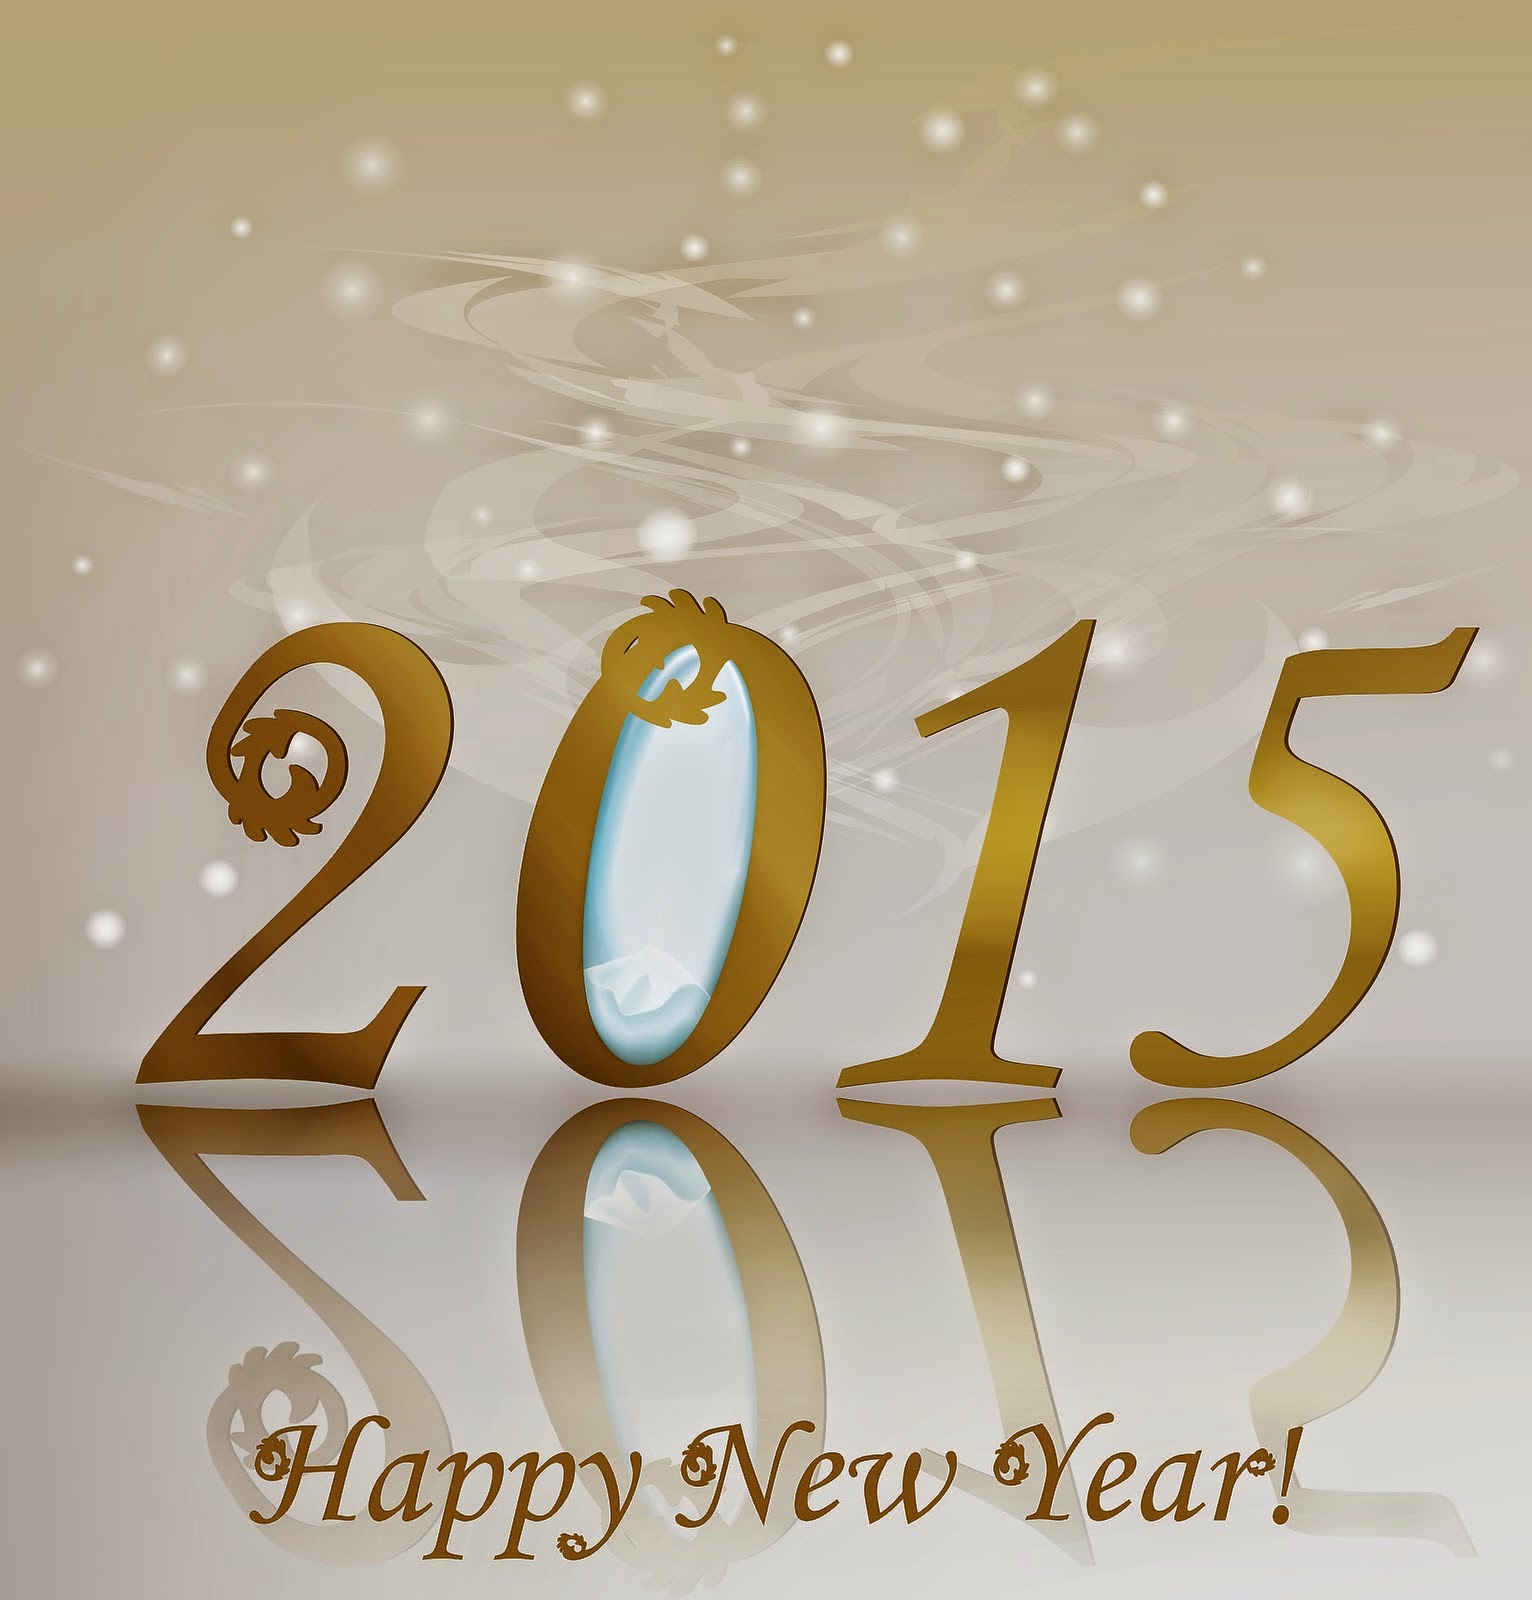 Advance Happy New Year Pictures 2015